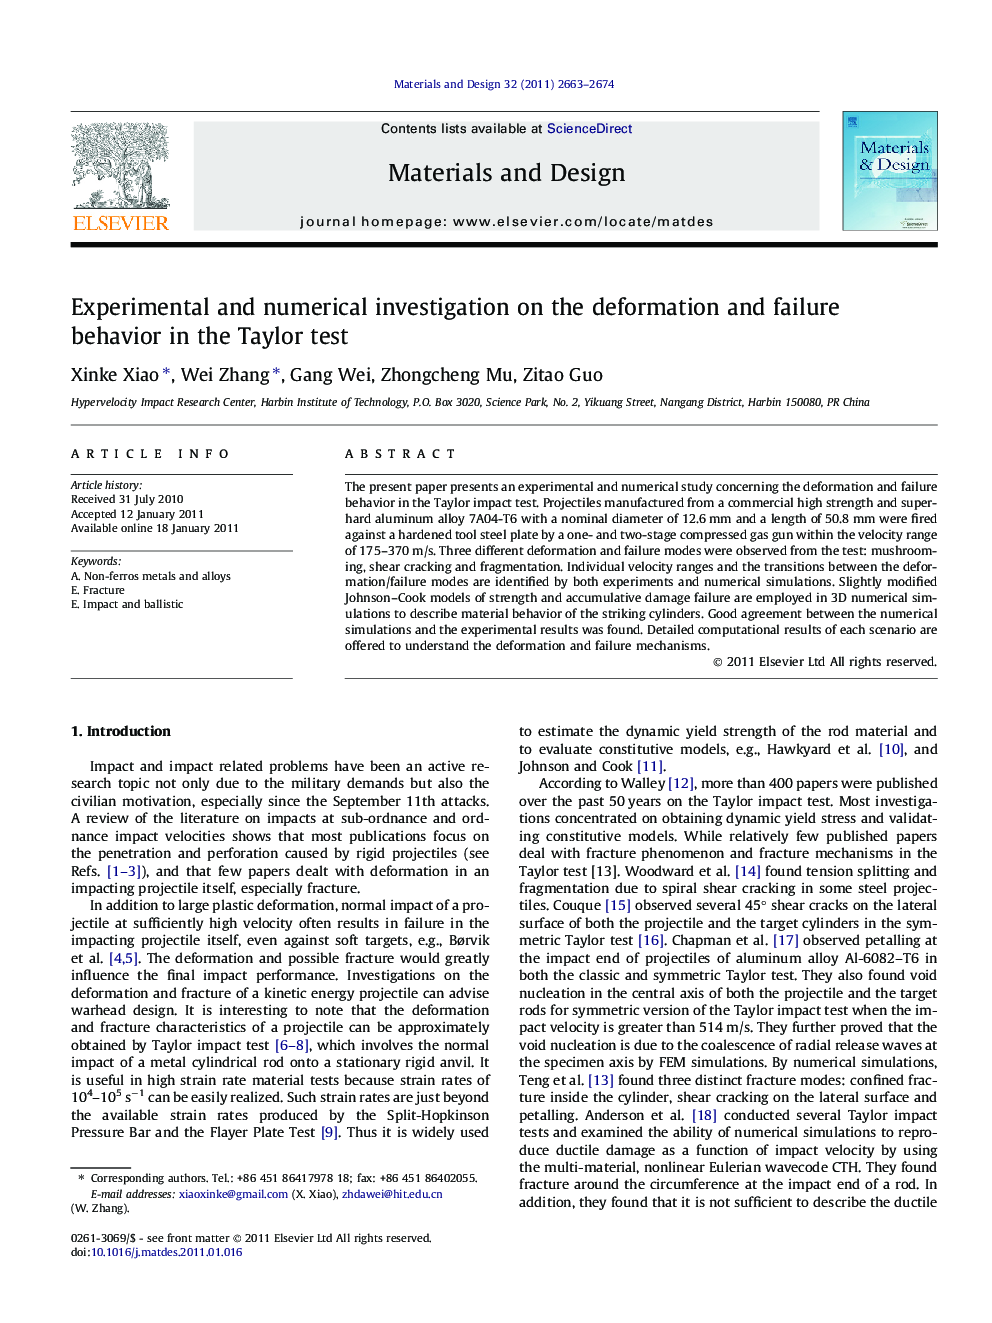 Experimental and numerical investigation on the deformation and failure behavior in the Taylor test